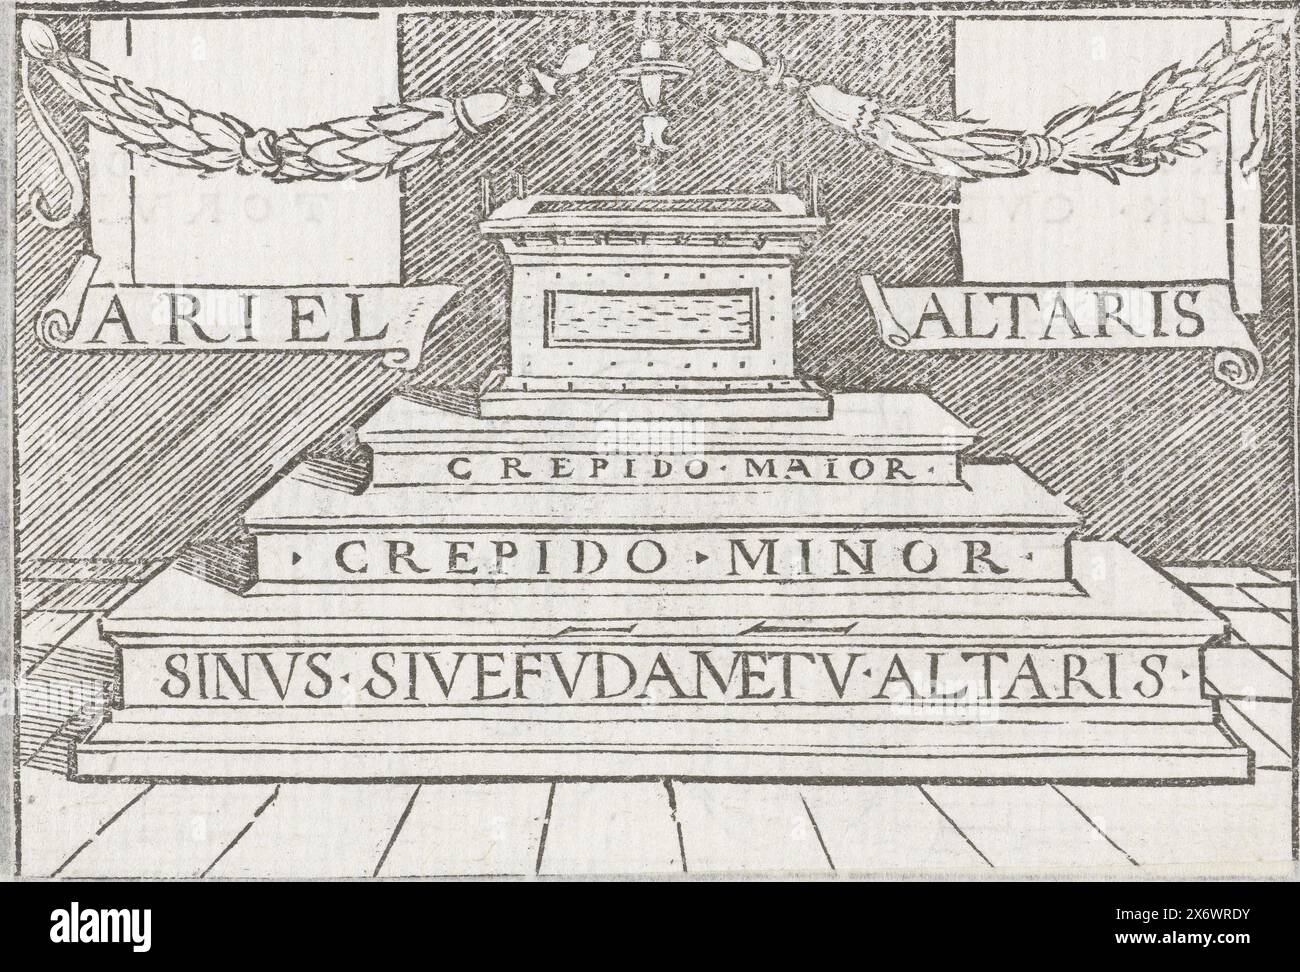 Altar in the new temple in vision of Ezekiel, Altar in the new temple according to the instructions of God as Ezekiel sees it in a vision. There is Latin text on the steps from the stage to the altar. In the margin above the image is the text Ezek. XLIII Stock Photo